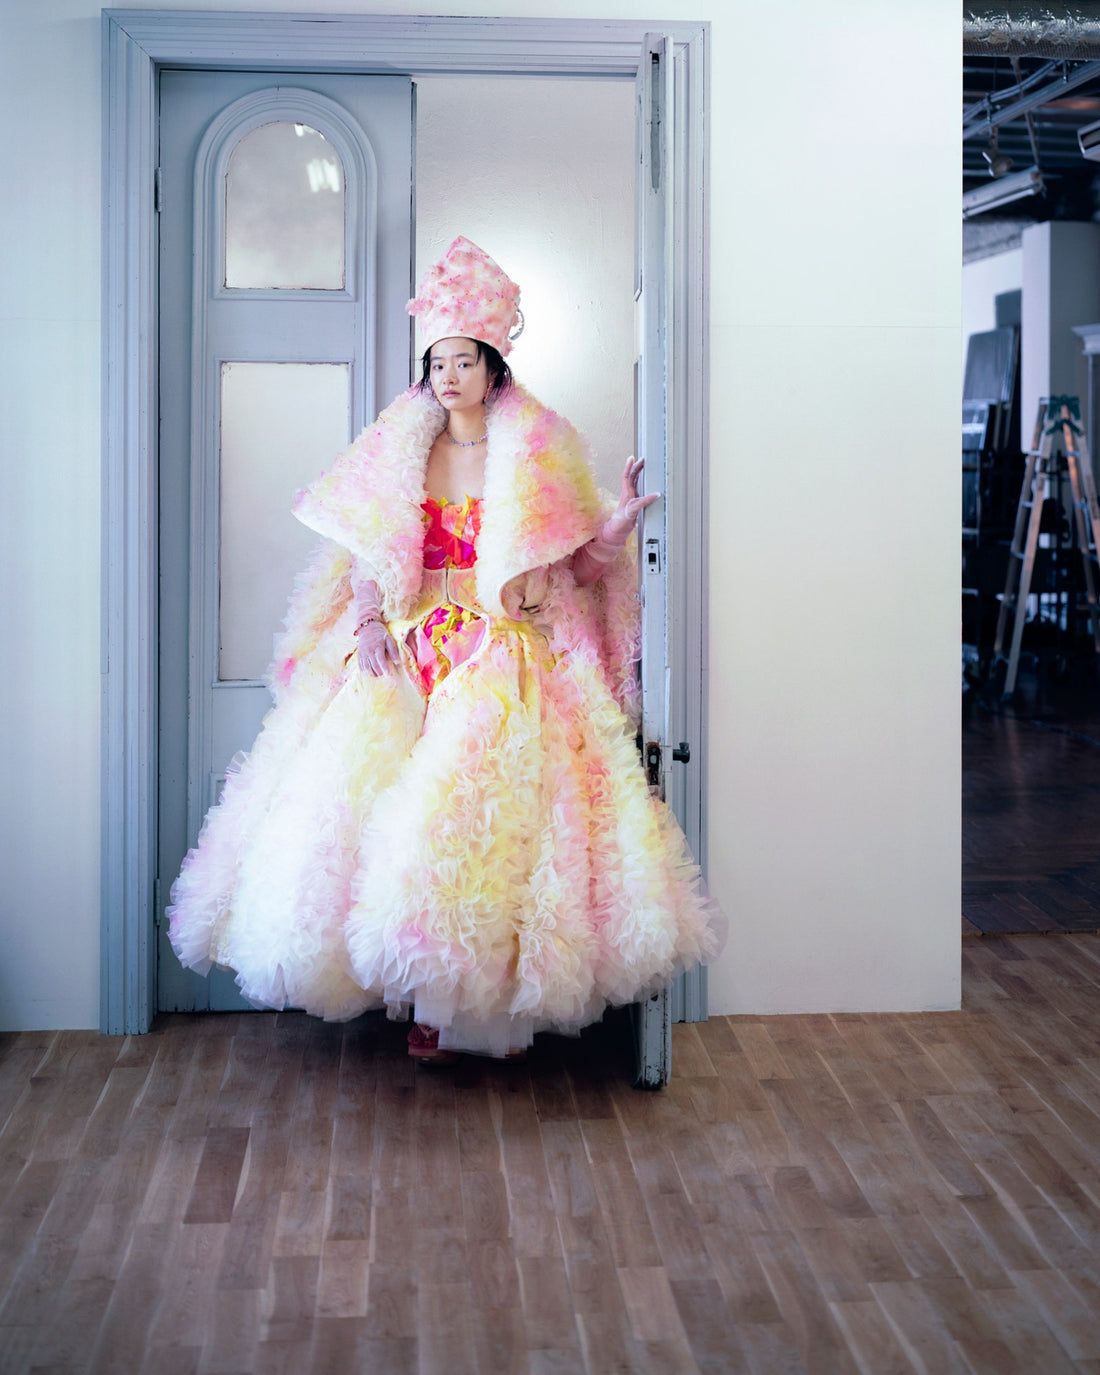 Does haute couture have what it takes to be sustainable?